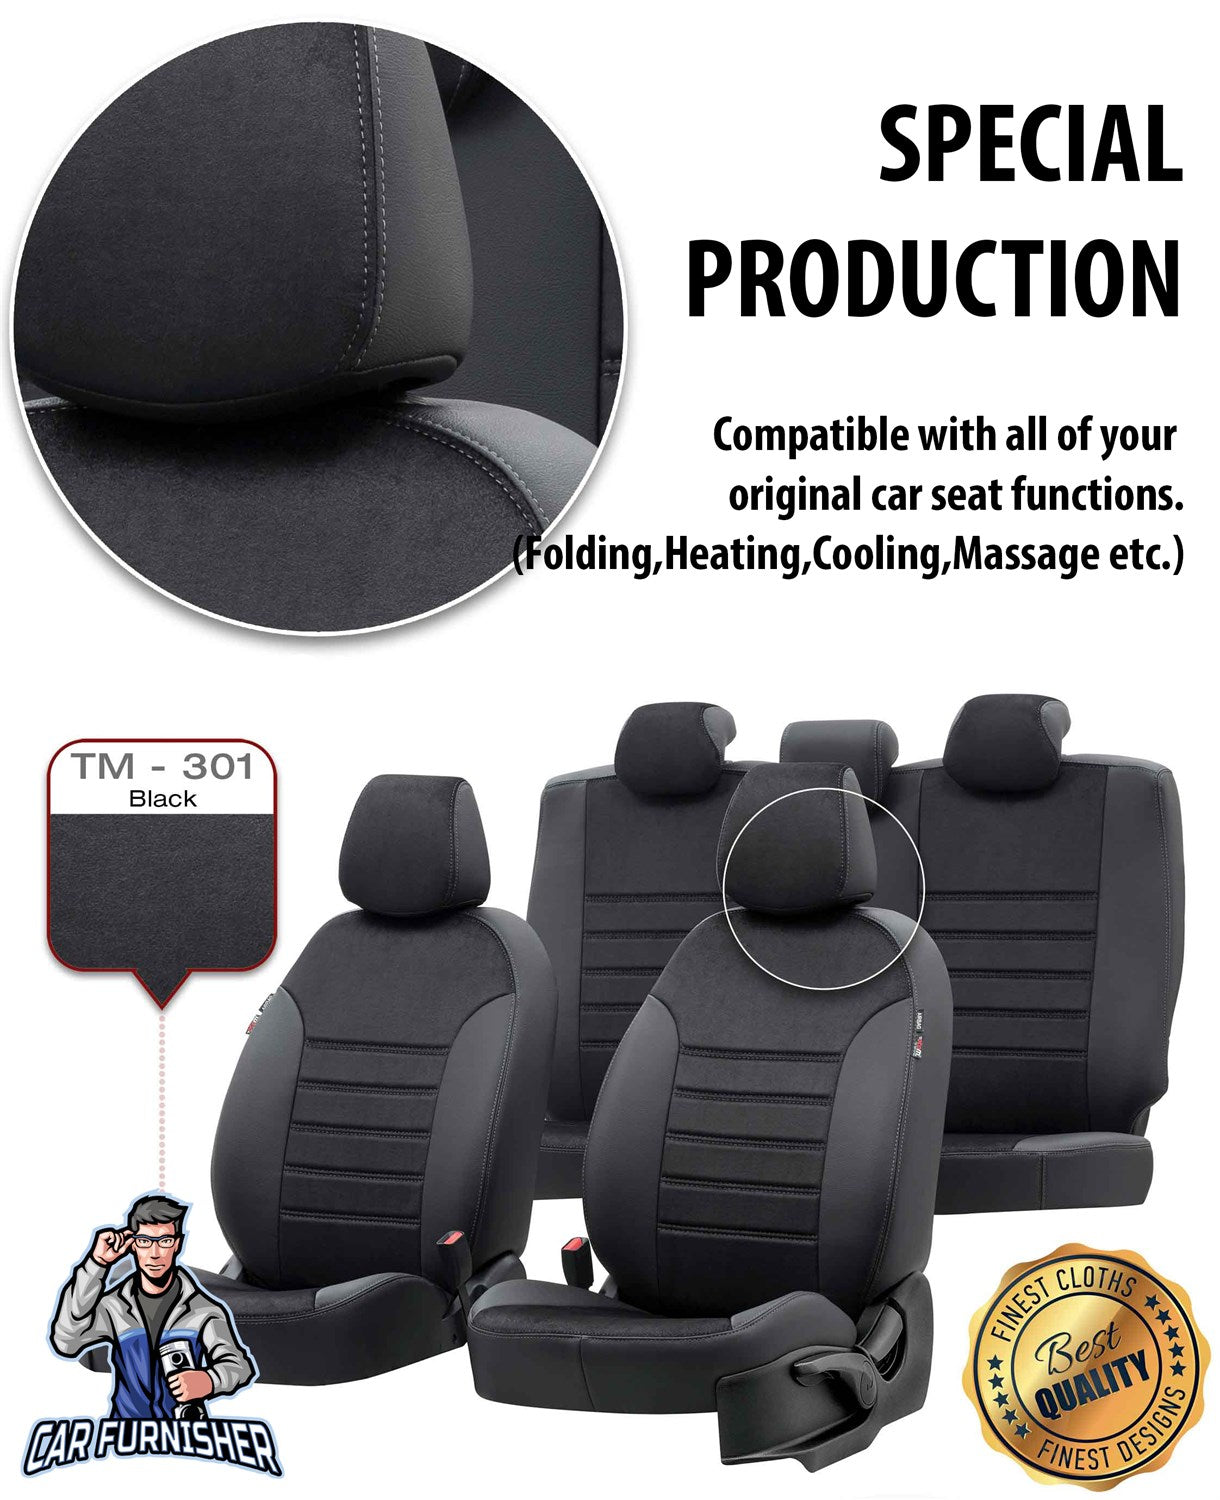 Citroen Jumper Car Seat Covers 2007-2018 Milano Design Smoked Black Leather & Fabric